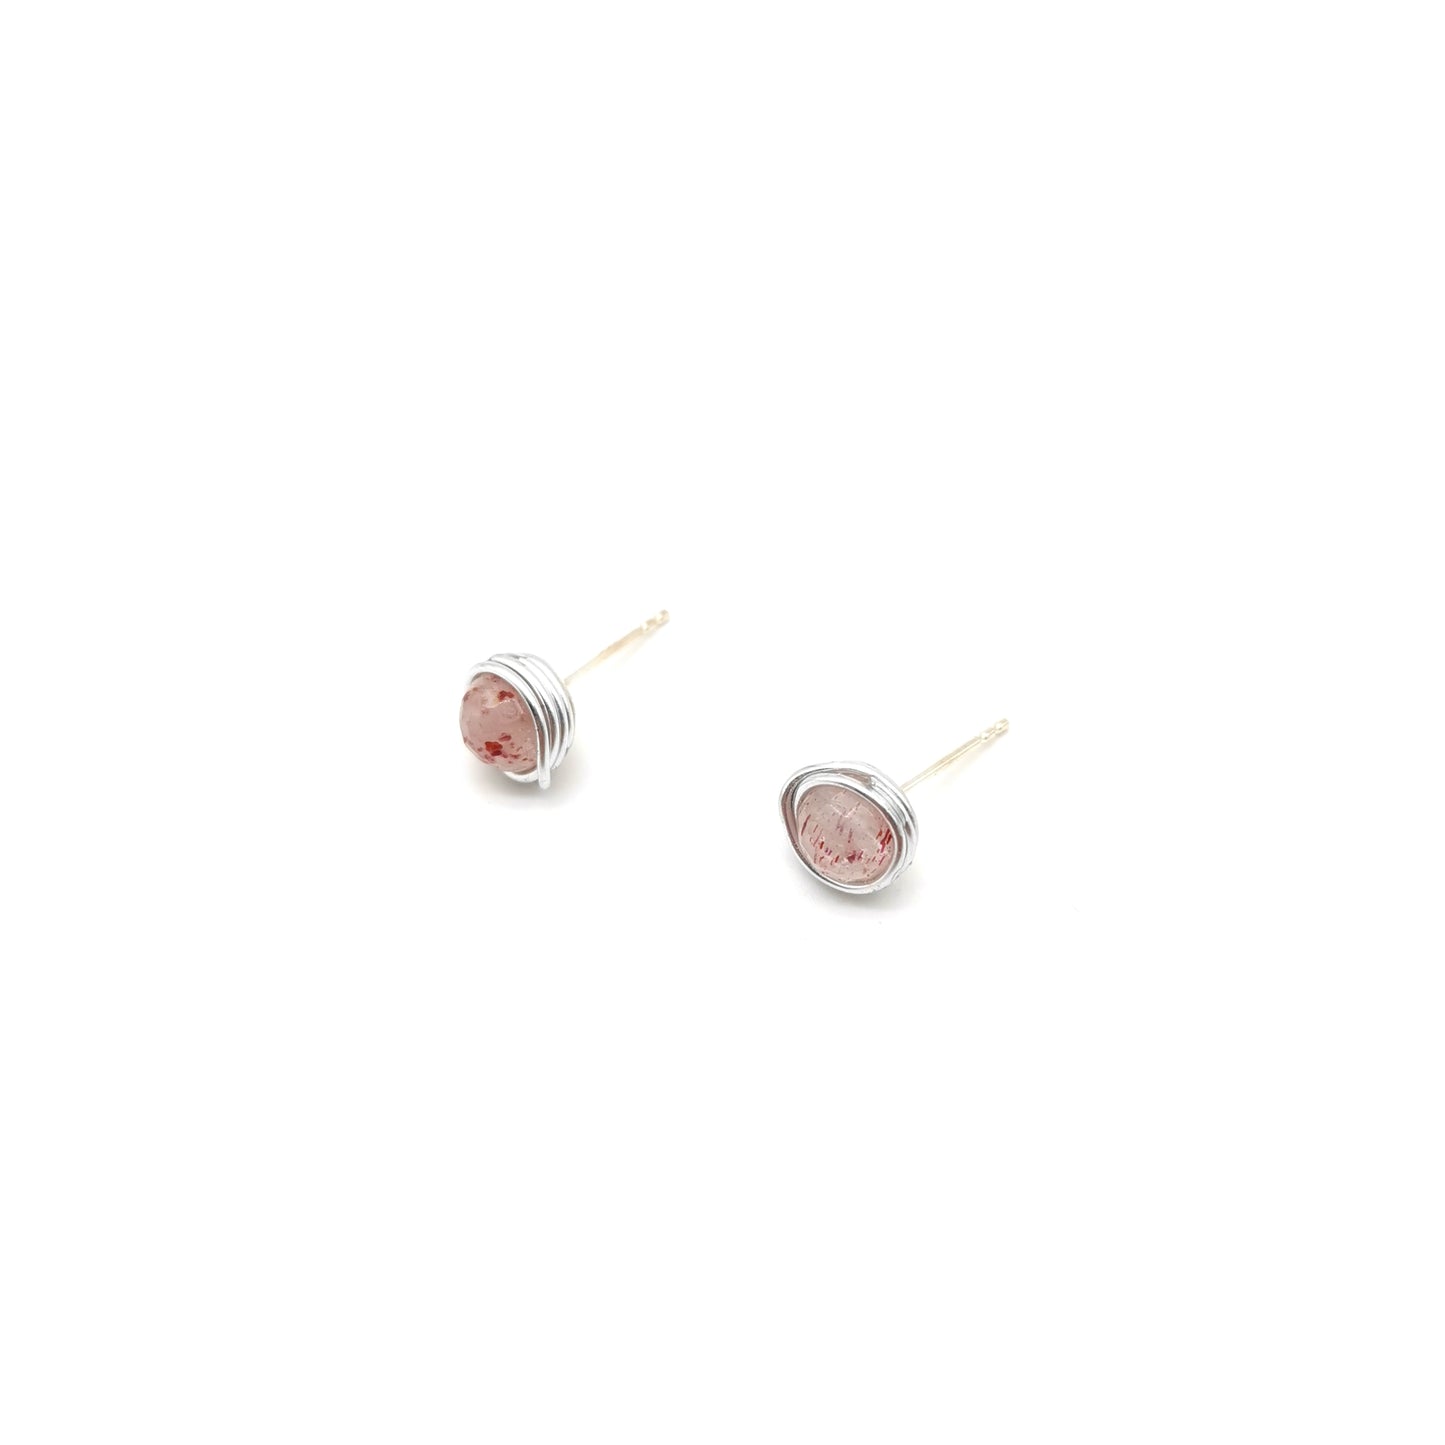 Strawberry Crystal Ball Sterling Silver Stud Earrings